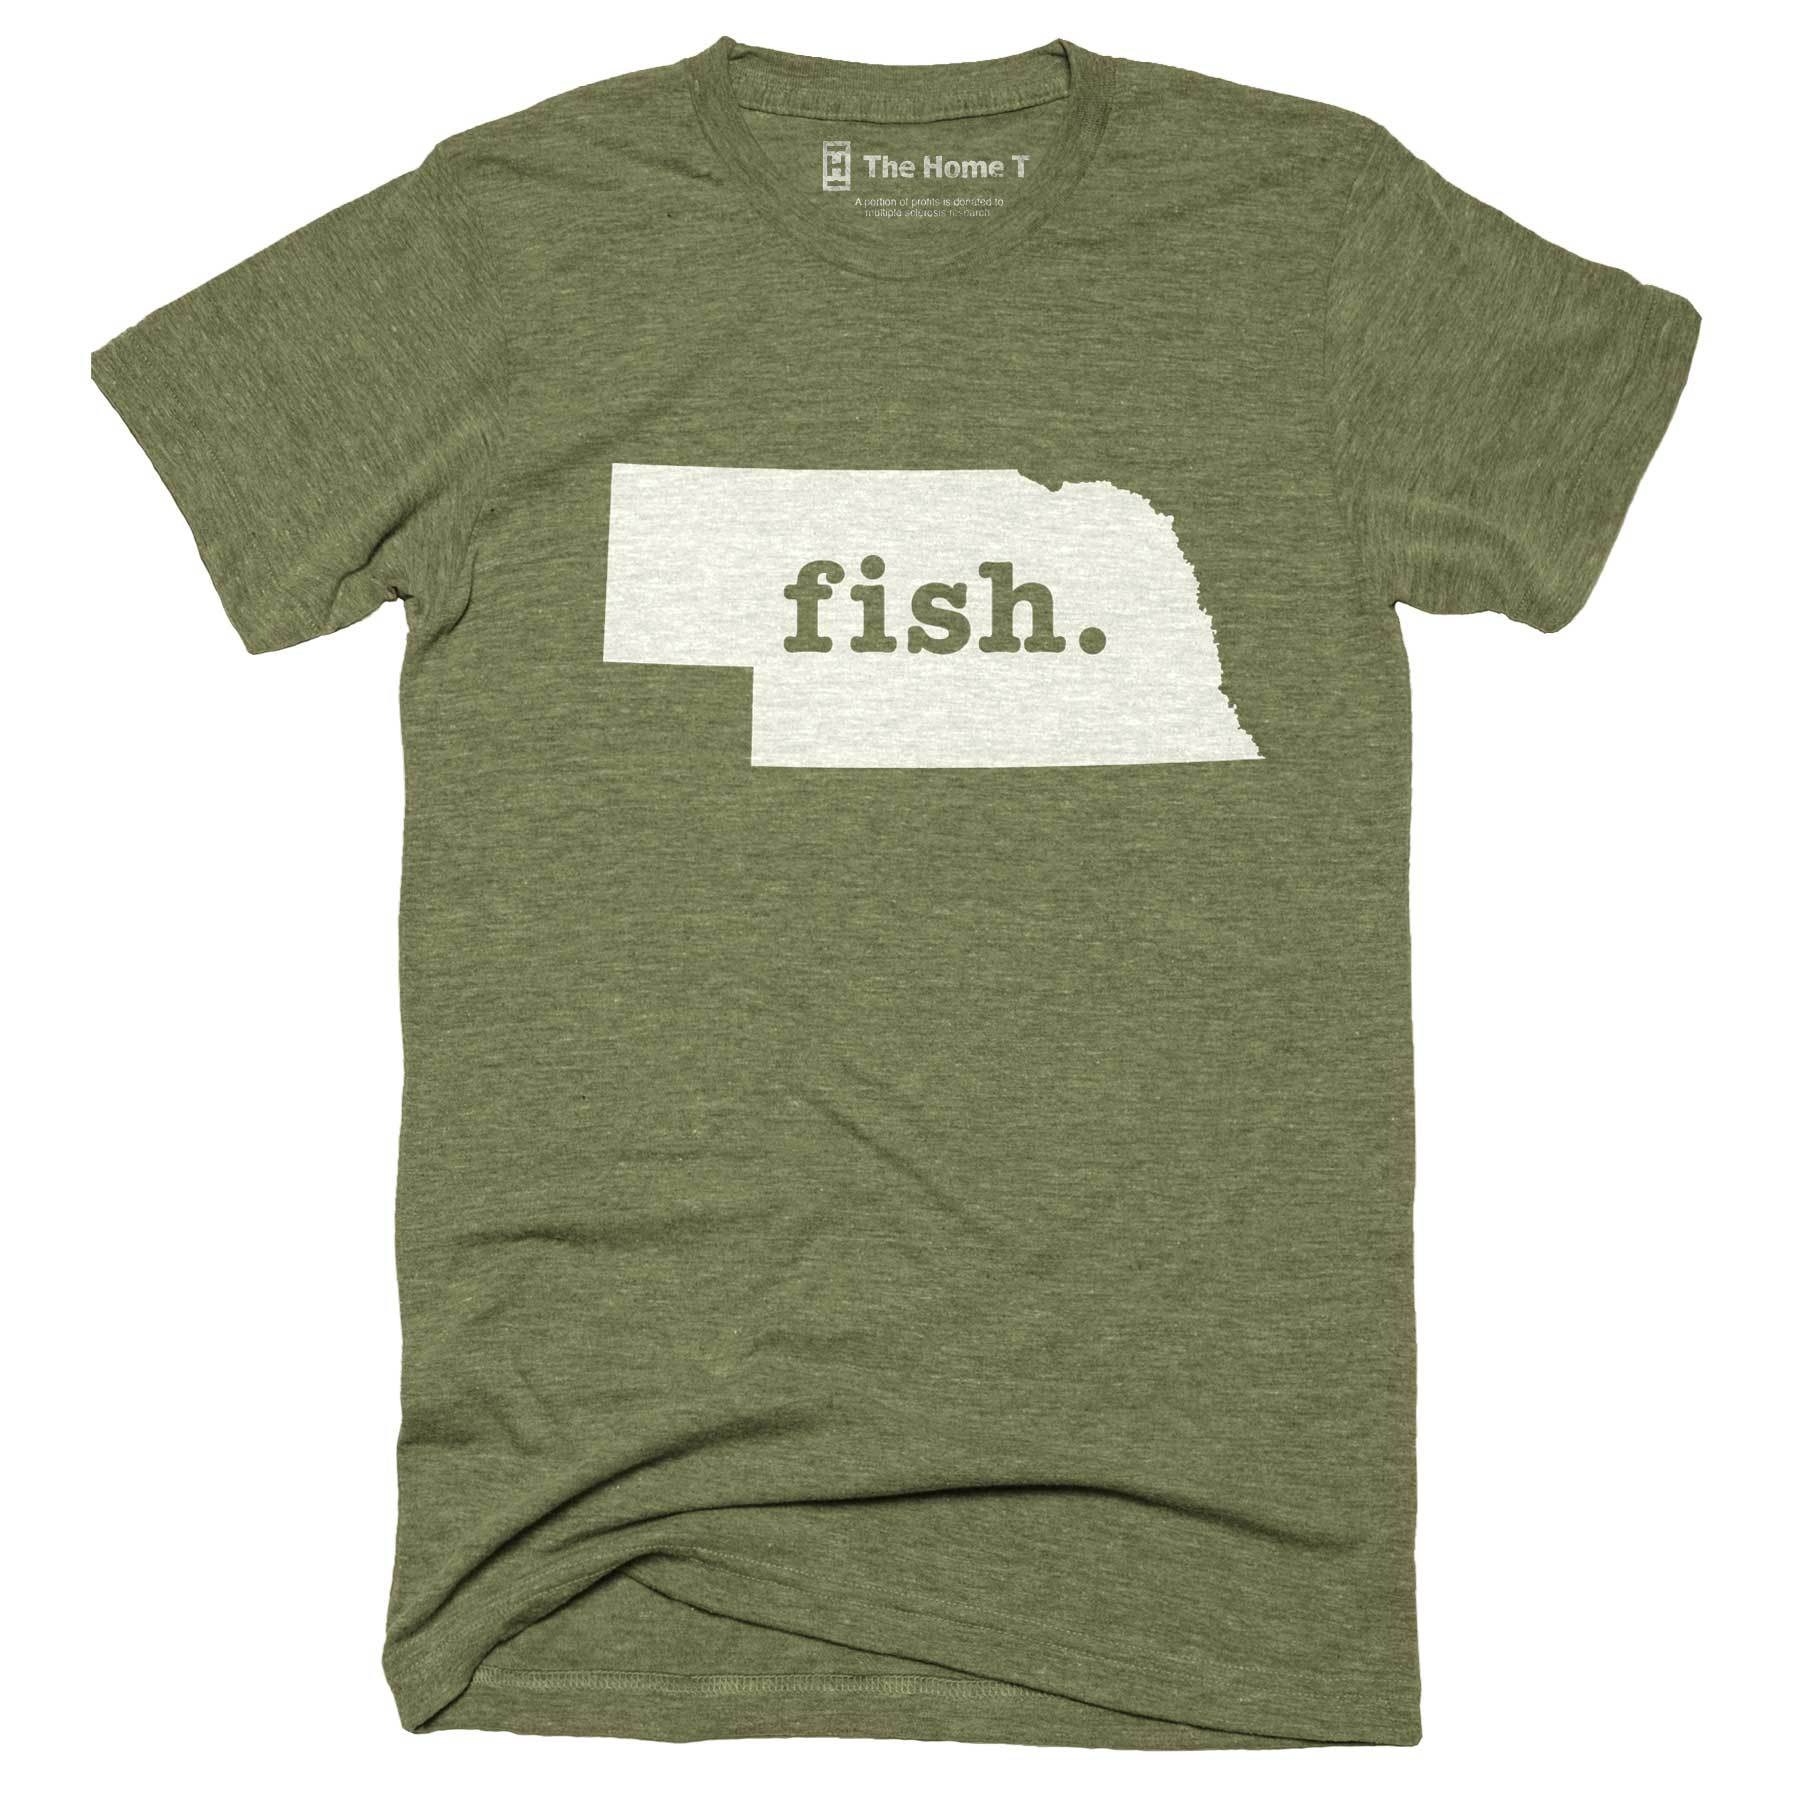 Nebraska Fish Home T-Shirt Outdoor Collection The Home T XXL Army Green